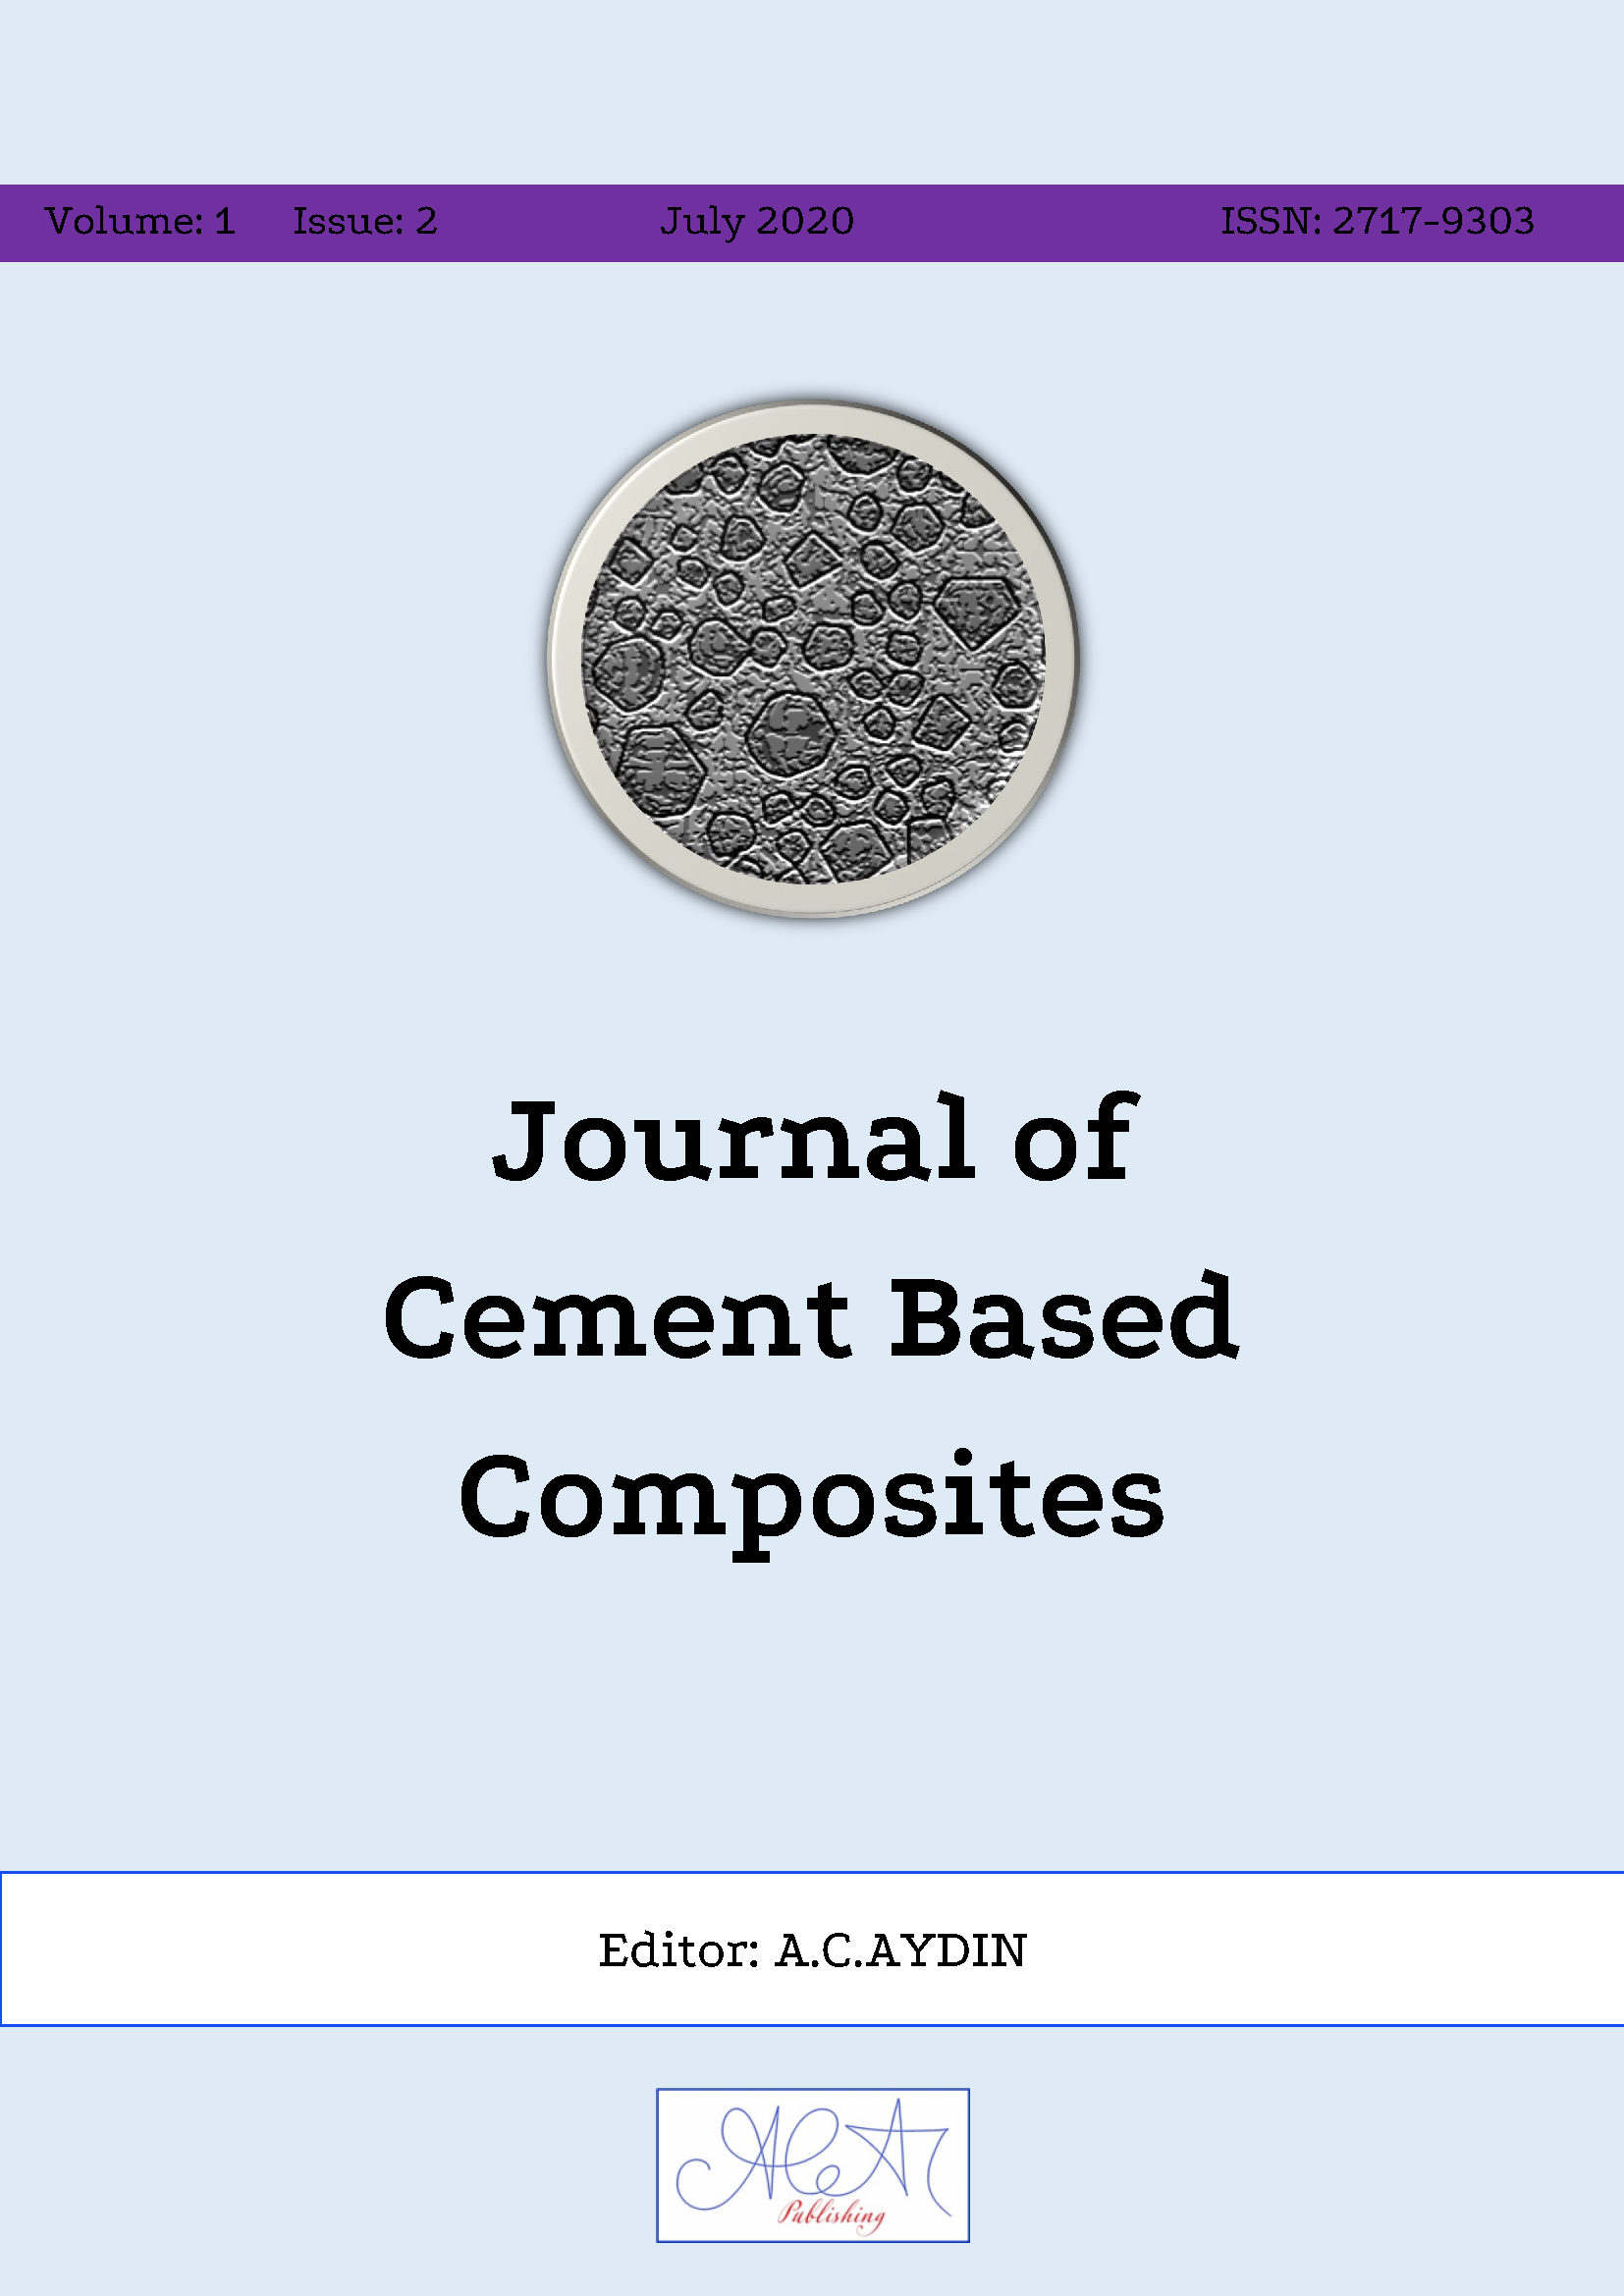 Cement Based Composites